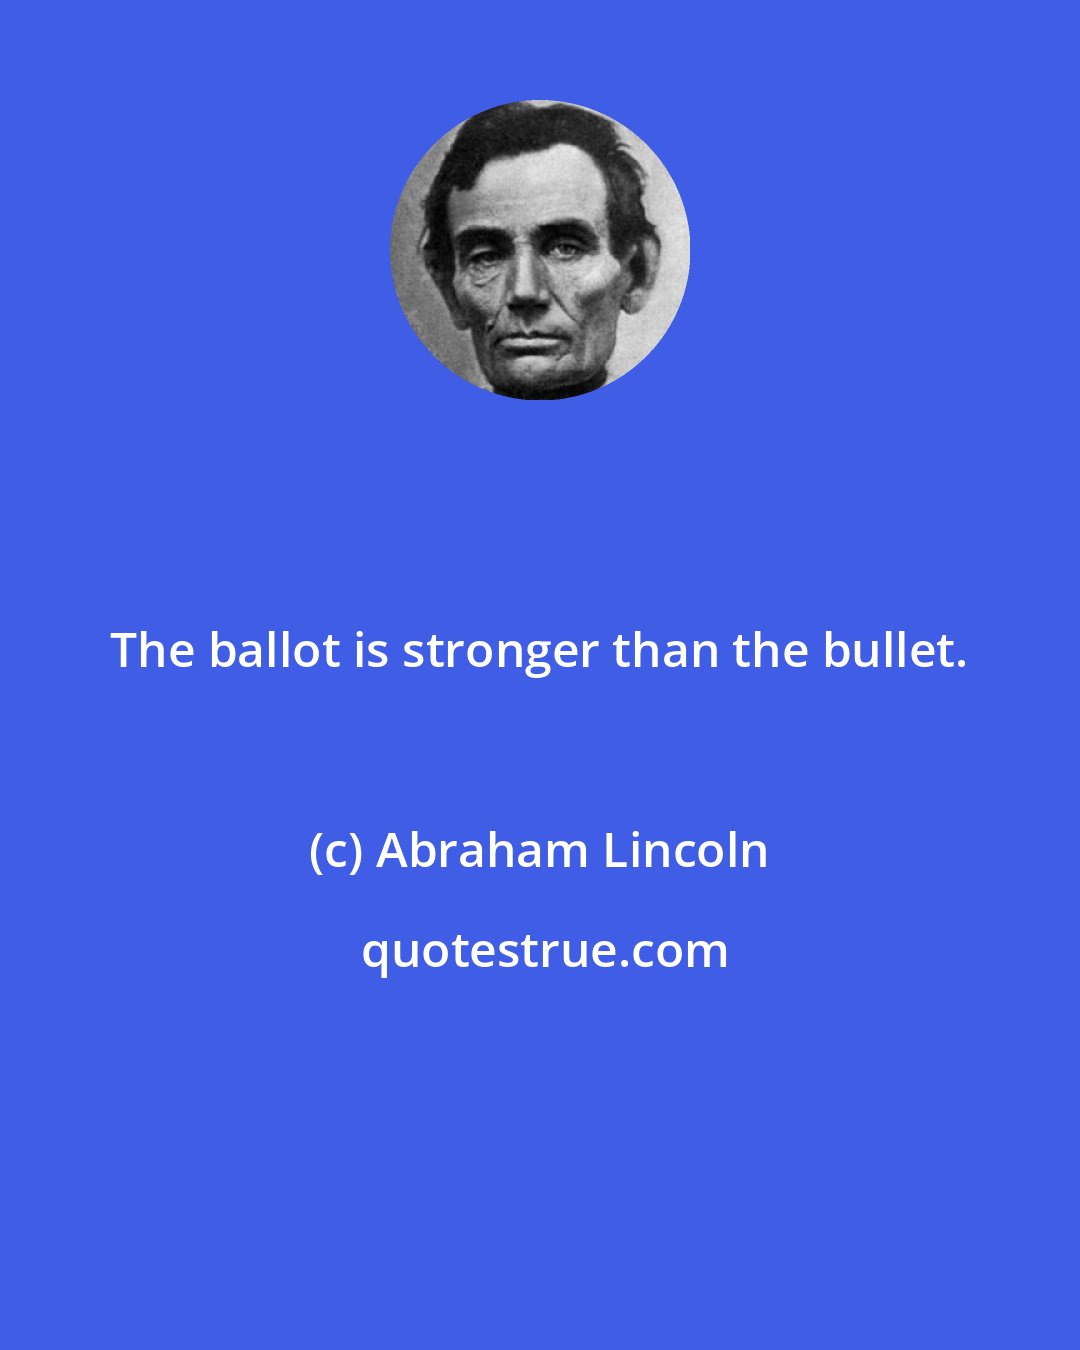 Abraham Lincoln: The ballot is stronger than the bullet.